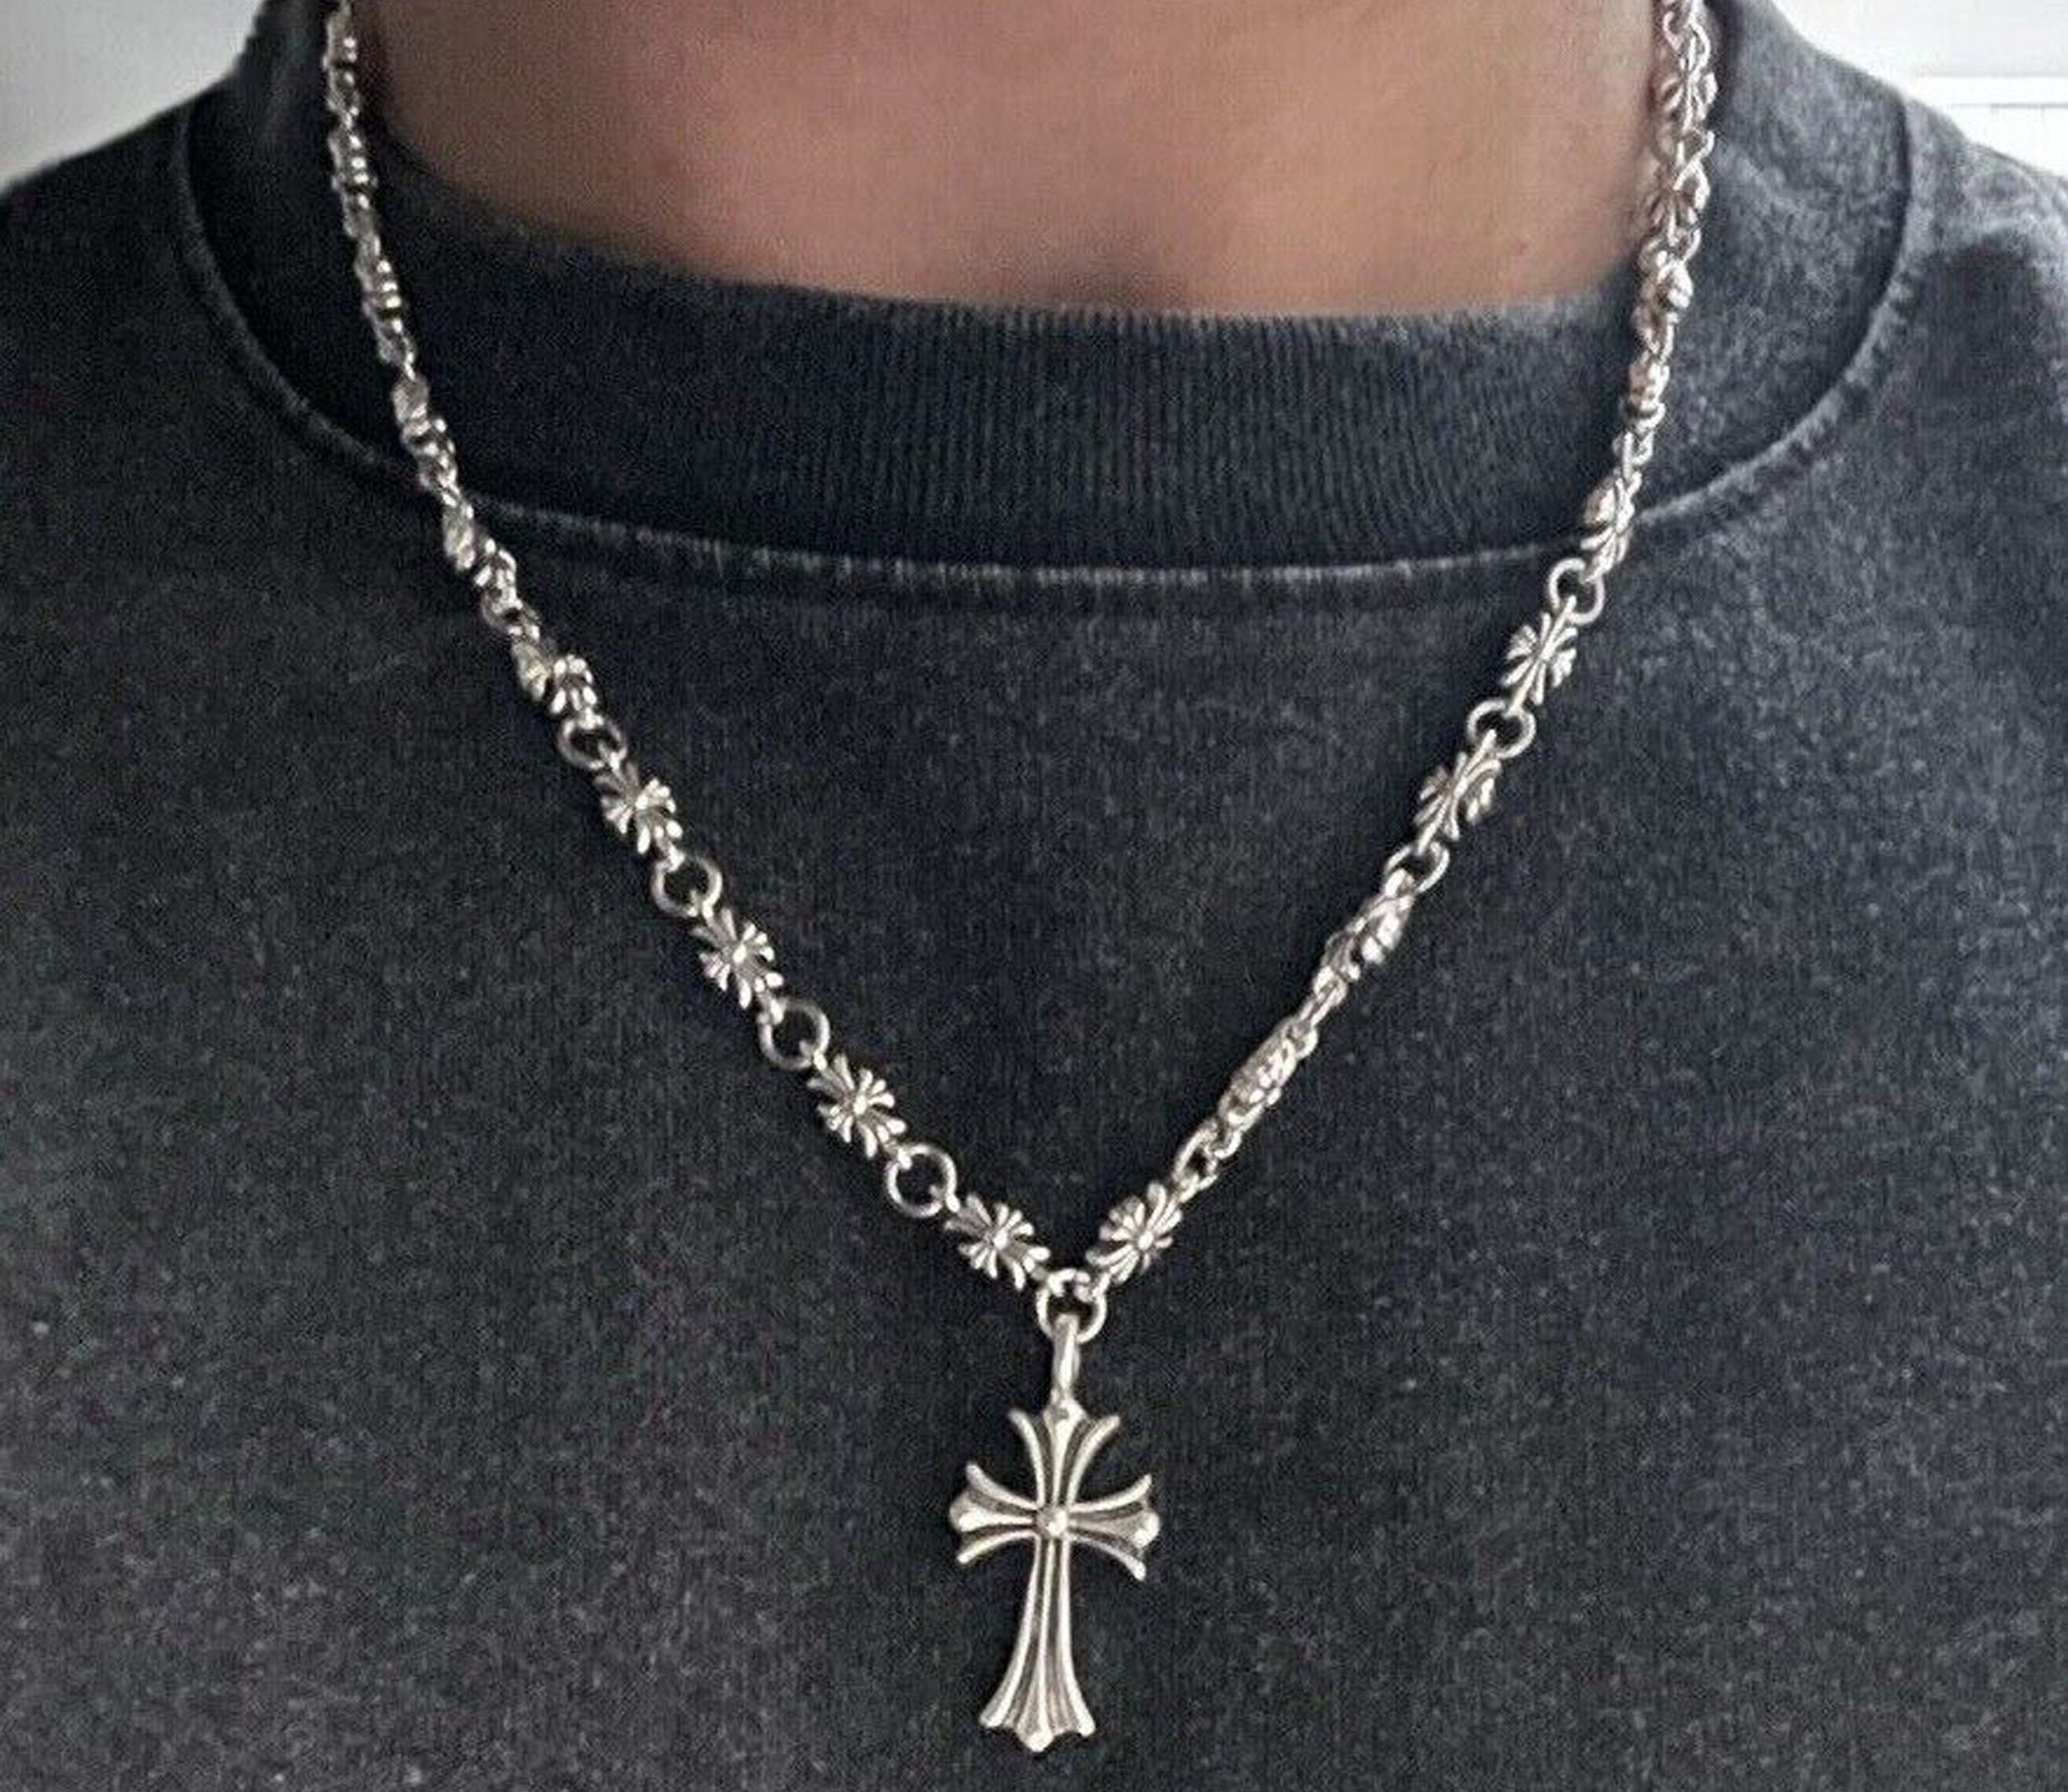 Chrome Hearts Style Necklace, Gothic Cross Chain, Silver CH Plated ...